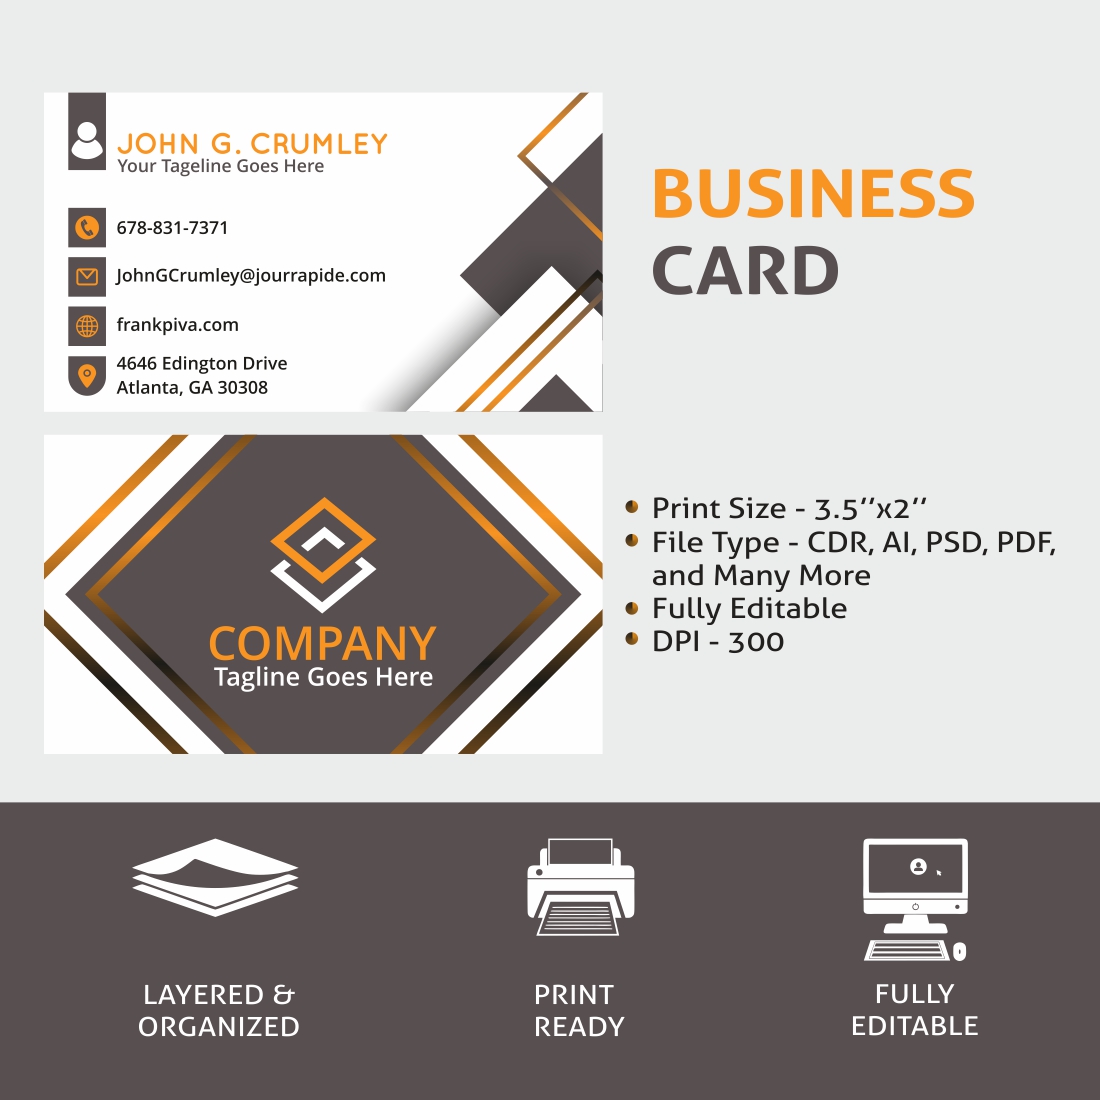 Business Card Template cover image.